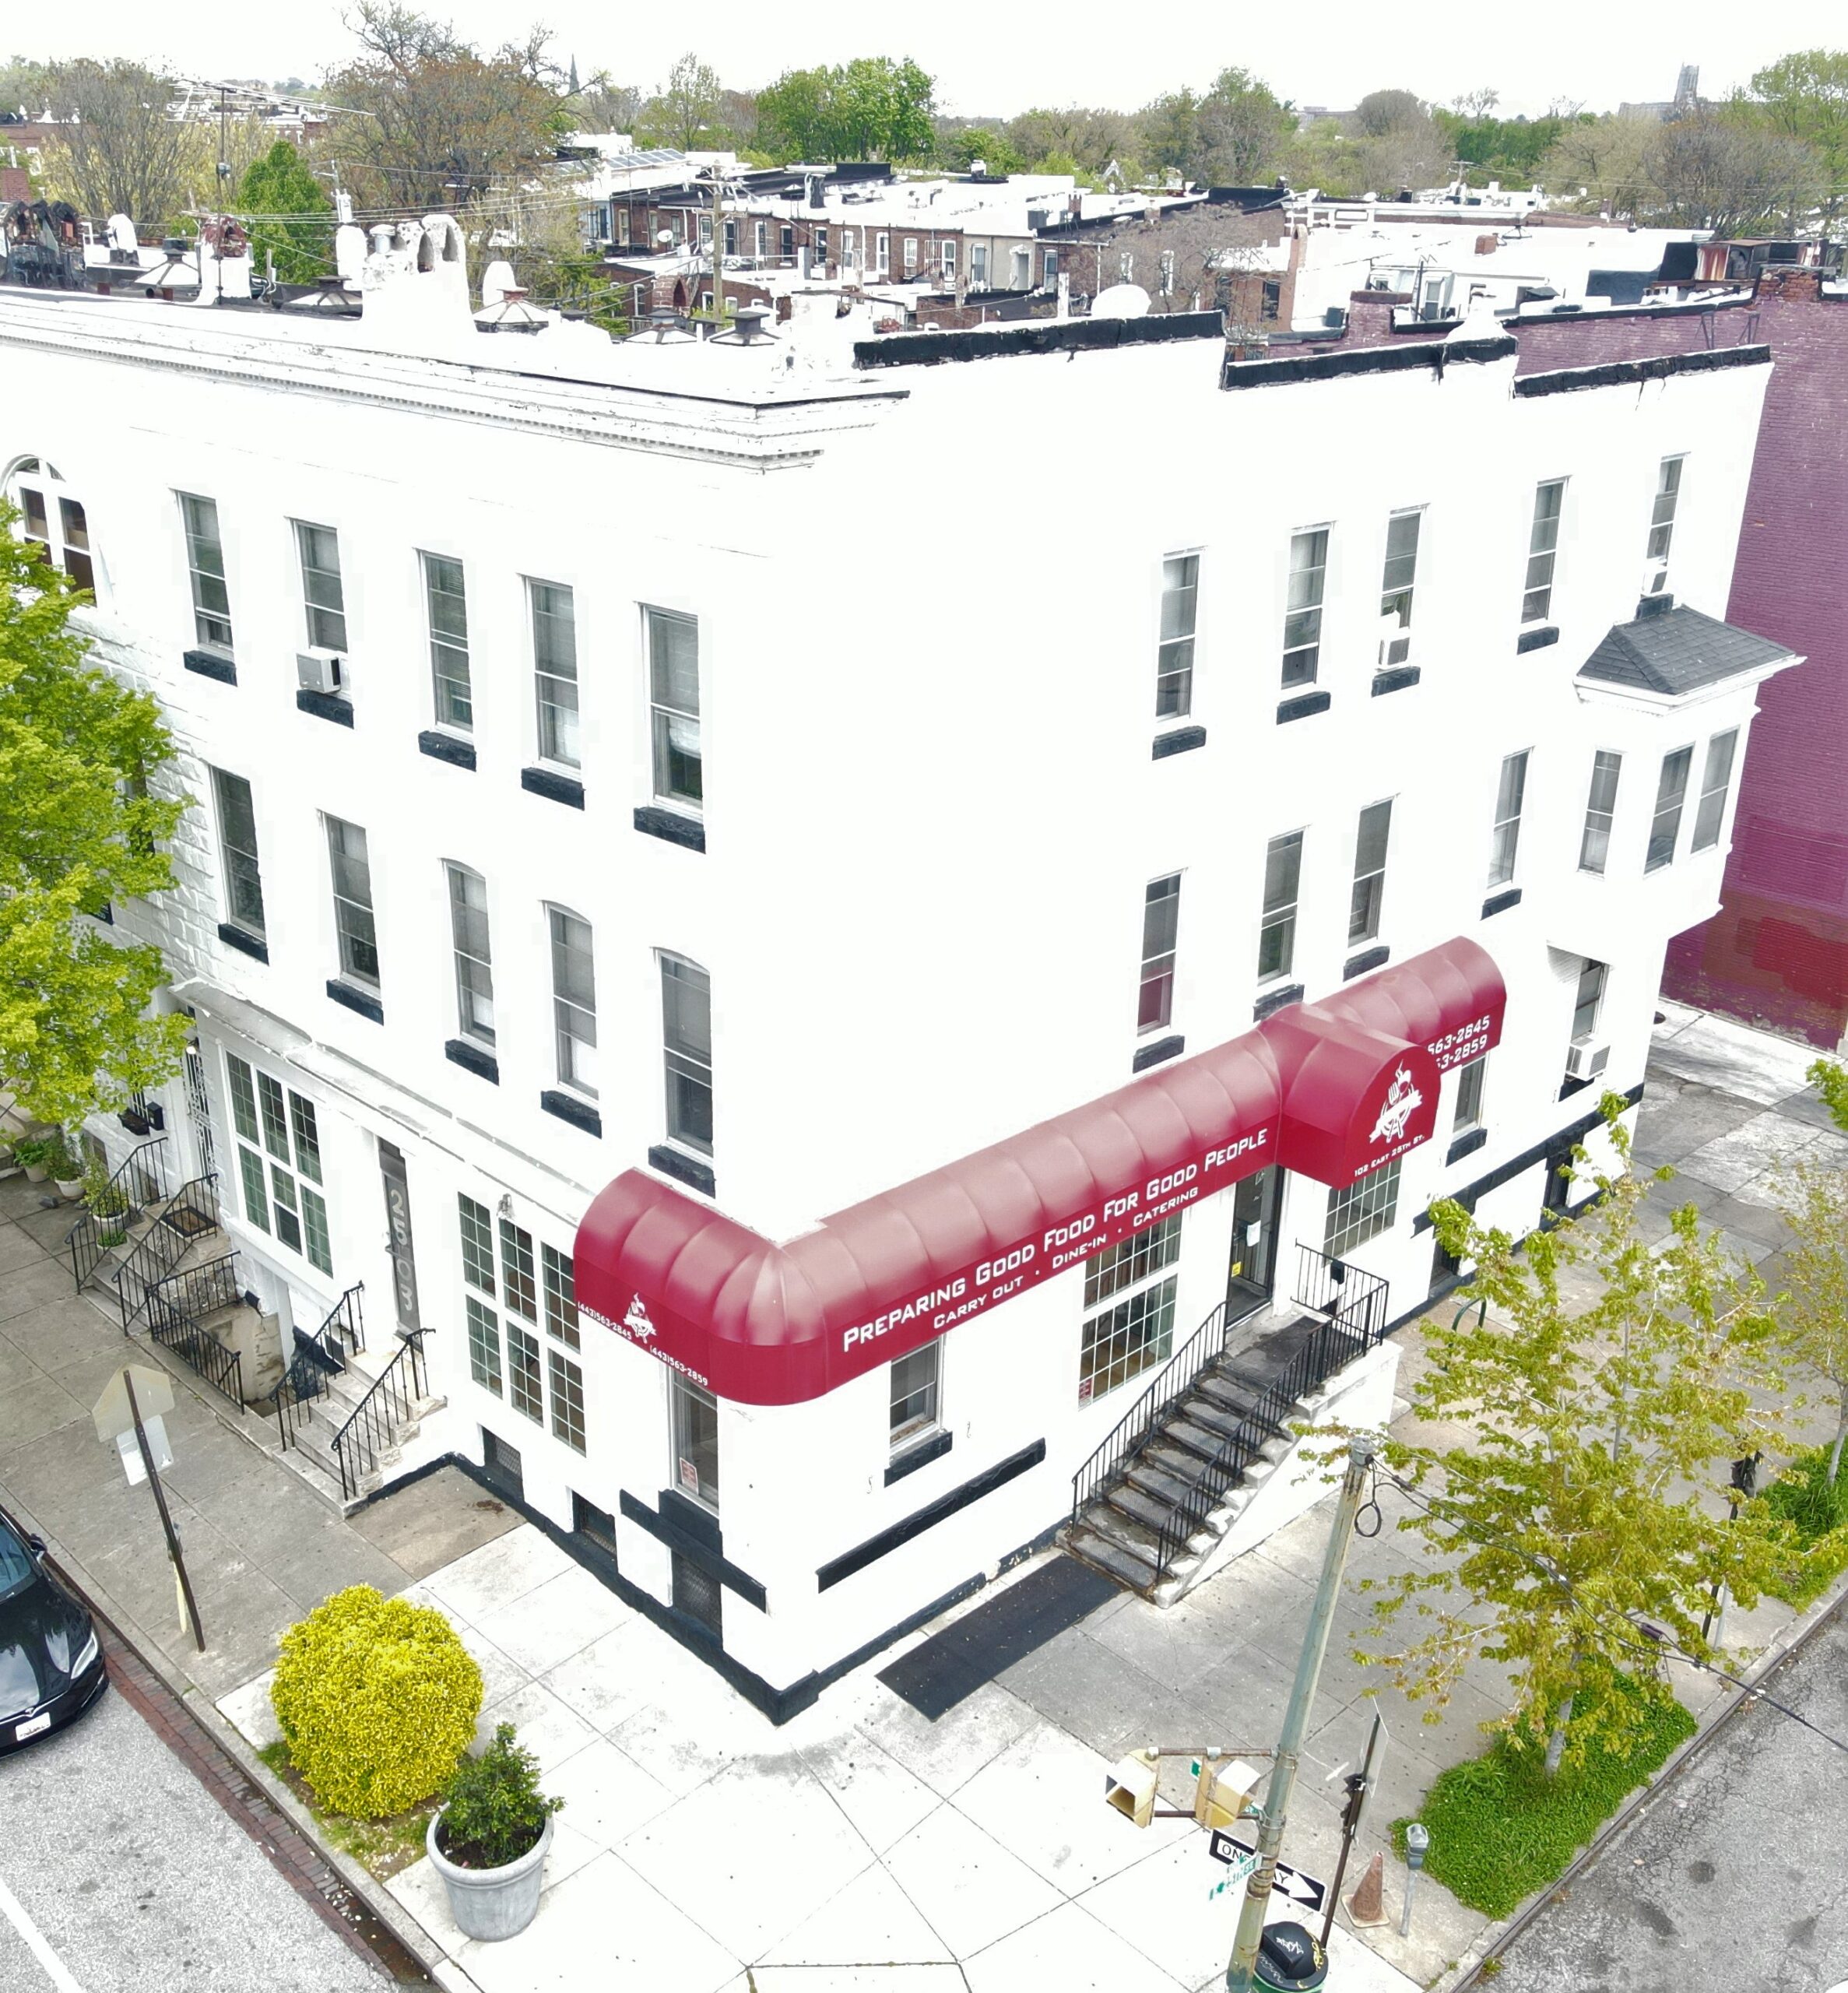 2503 Saint Paul St: C-1 Zoned Mixed Use; 1 Restaurant, 5 Offices, 4 Apartments